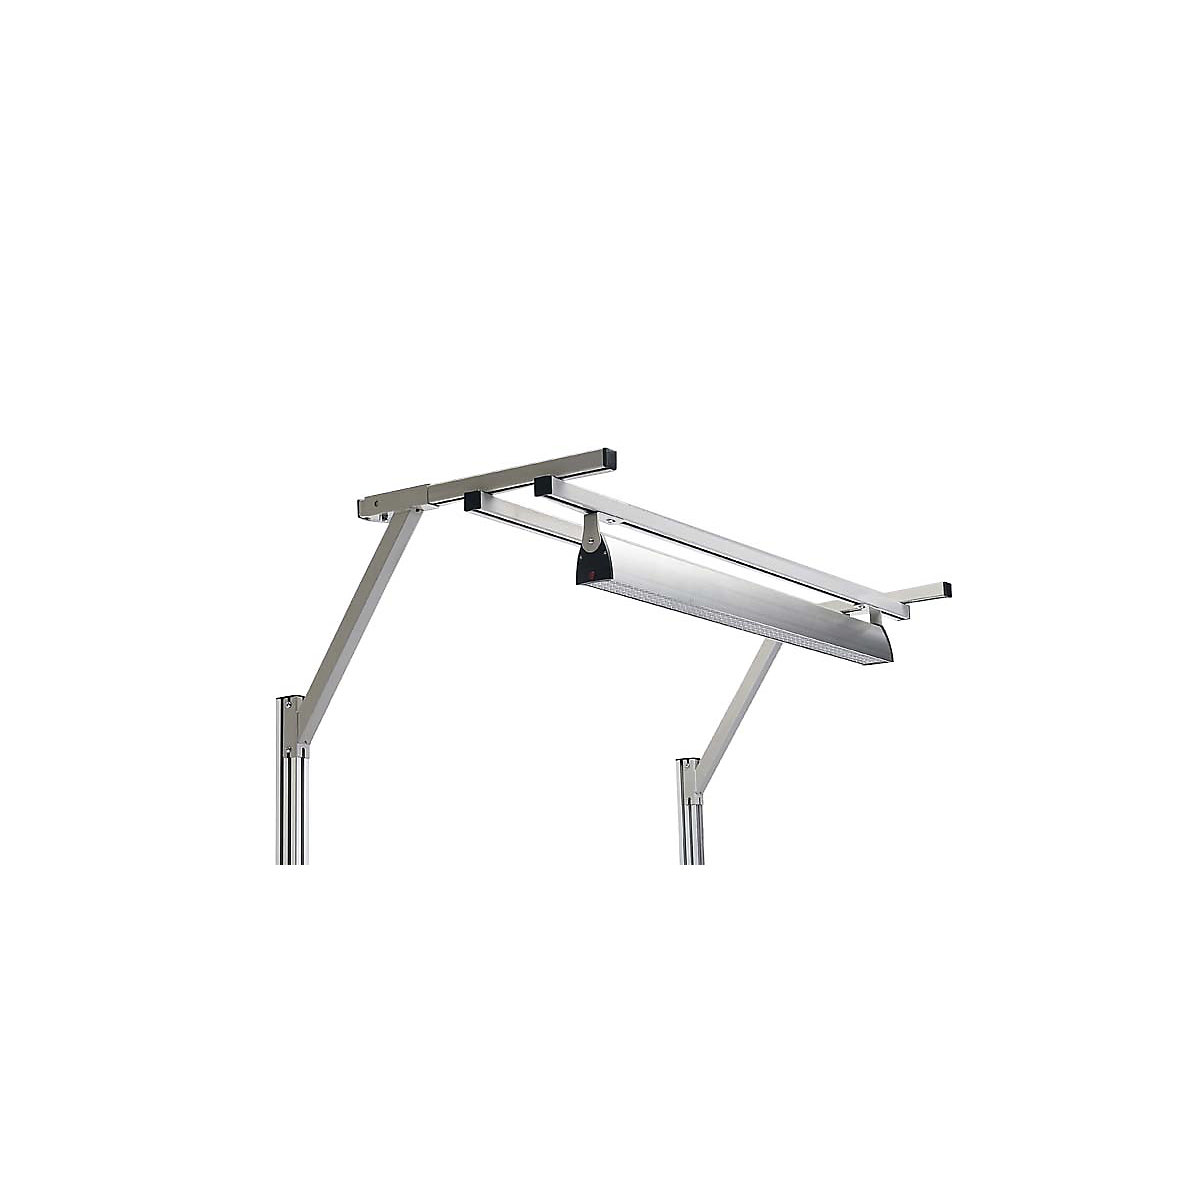 Support frame for work table - Treston